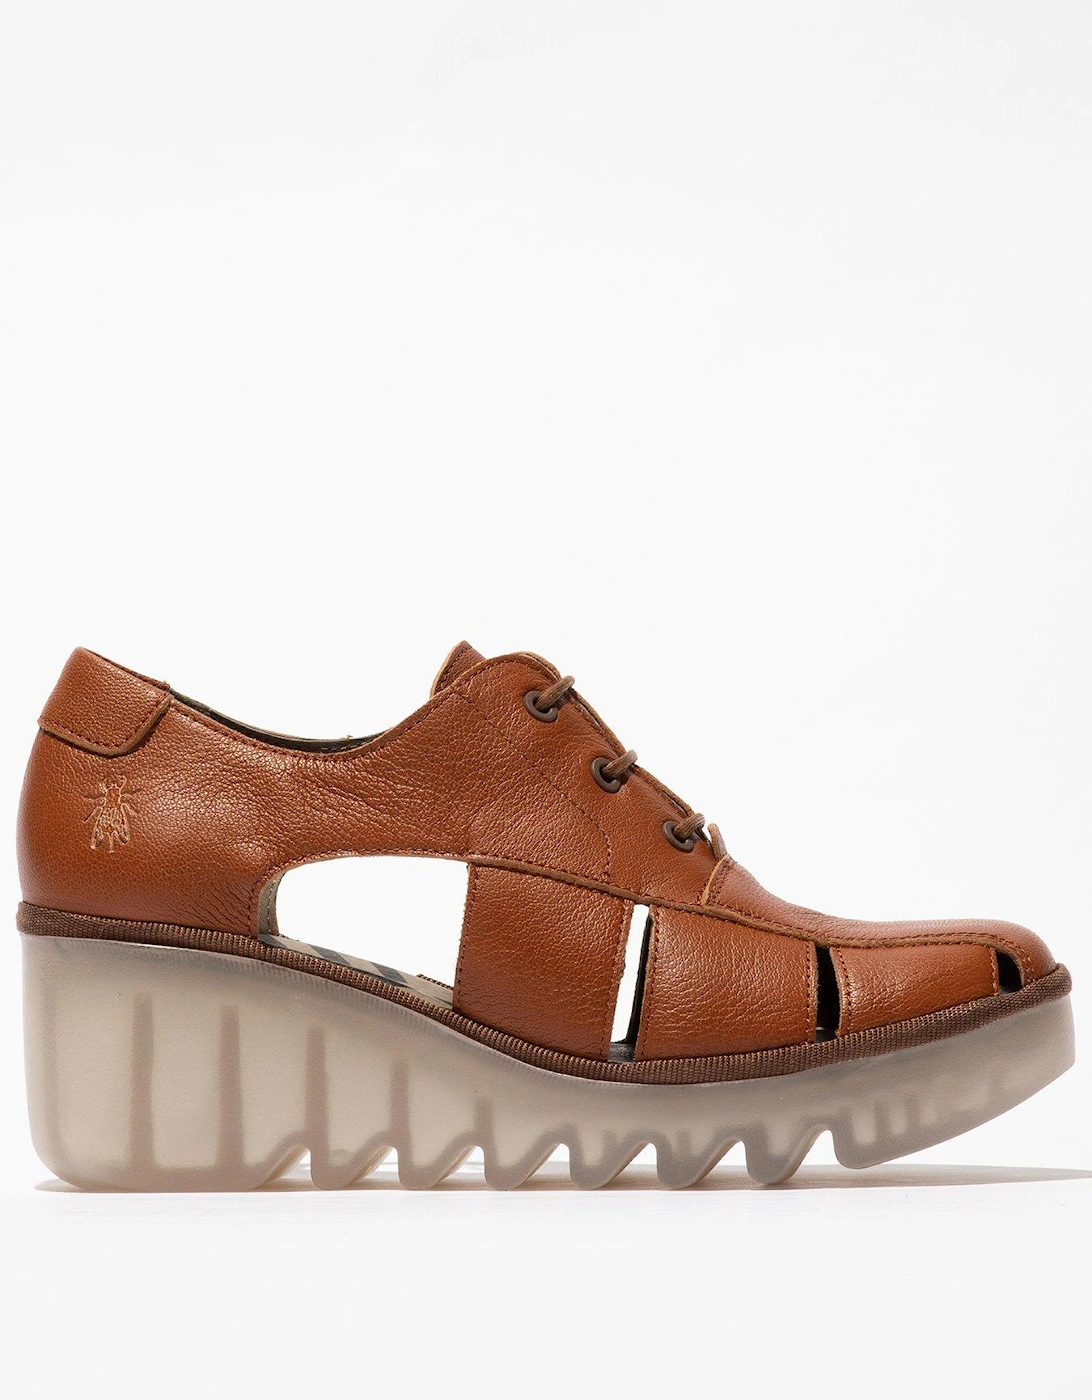 Bogi Lace Up Cut Out Wedged Shoes - Tan, 5 of 4